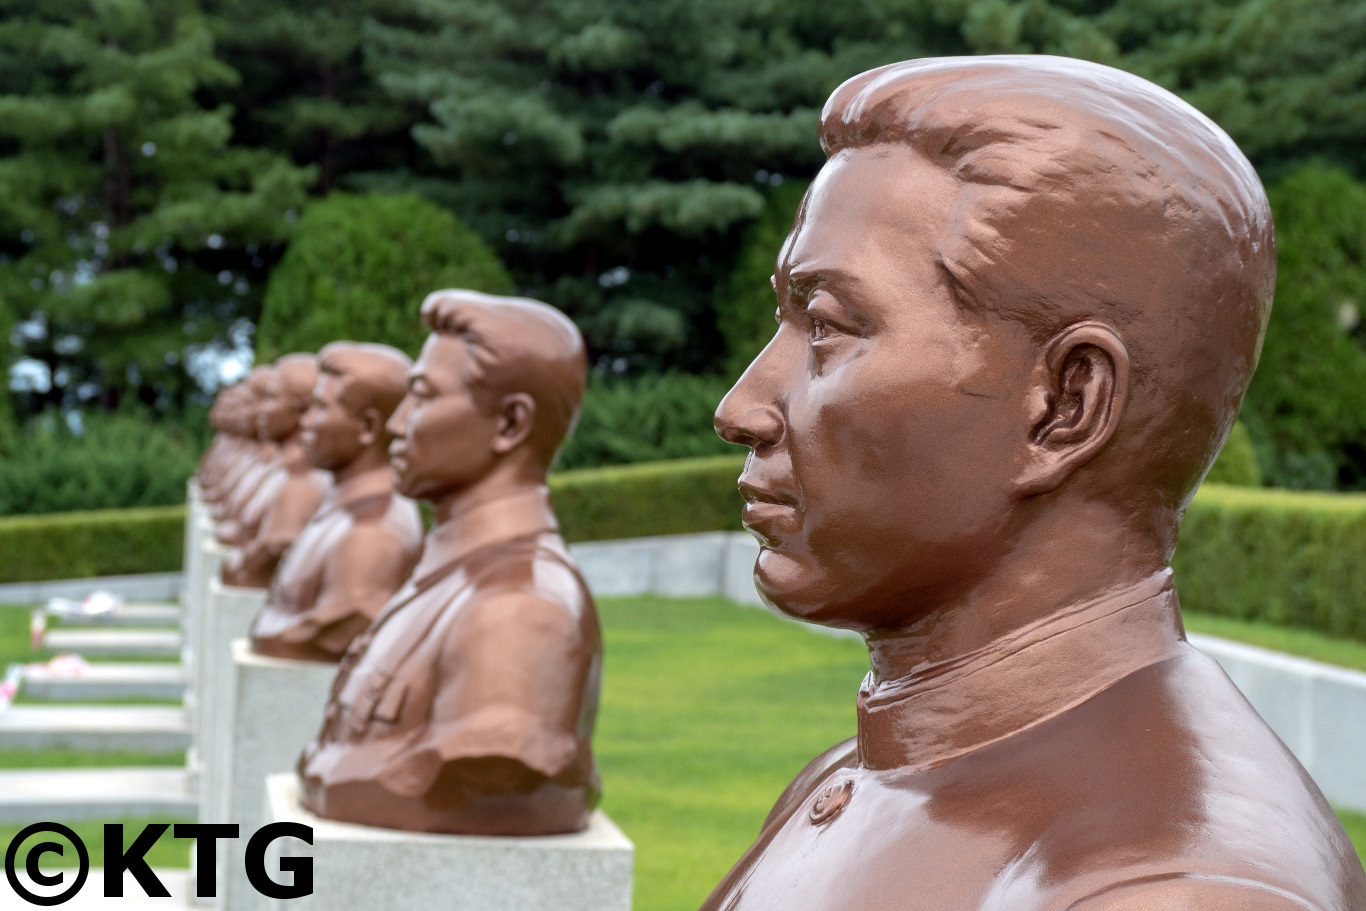 Close up views of the bronze busts of national heroes in DPRK at the Revolutionary Martyr's Cemetery in the outskirts of Pyongyang, capital of North Korea